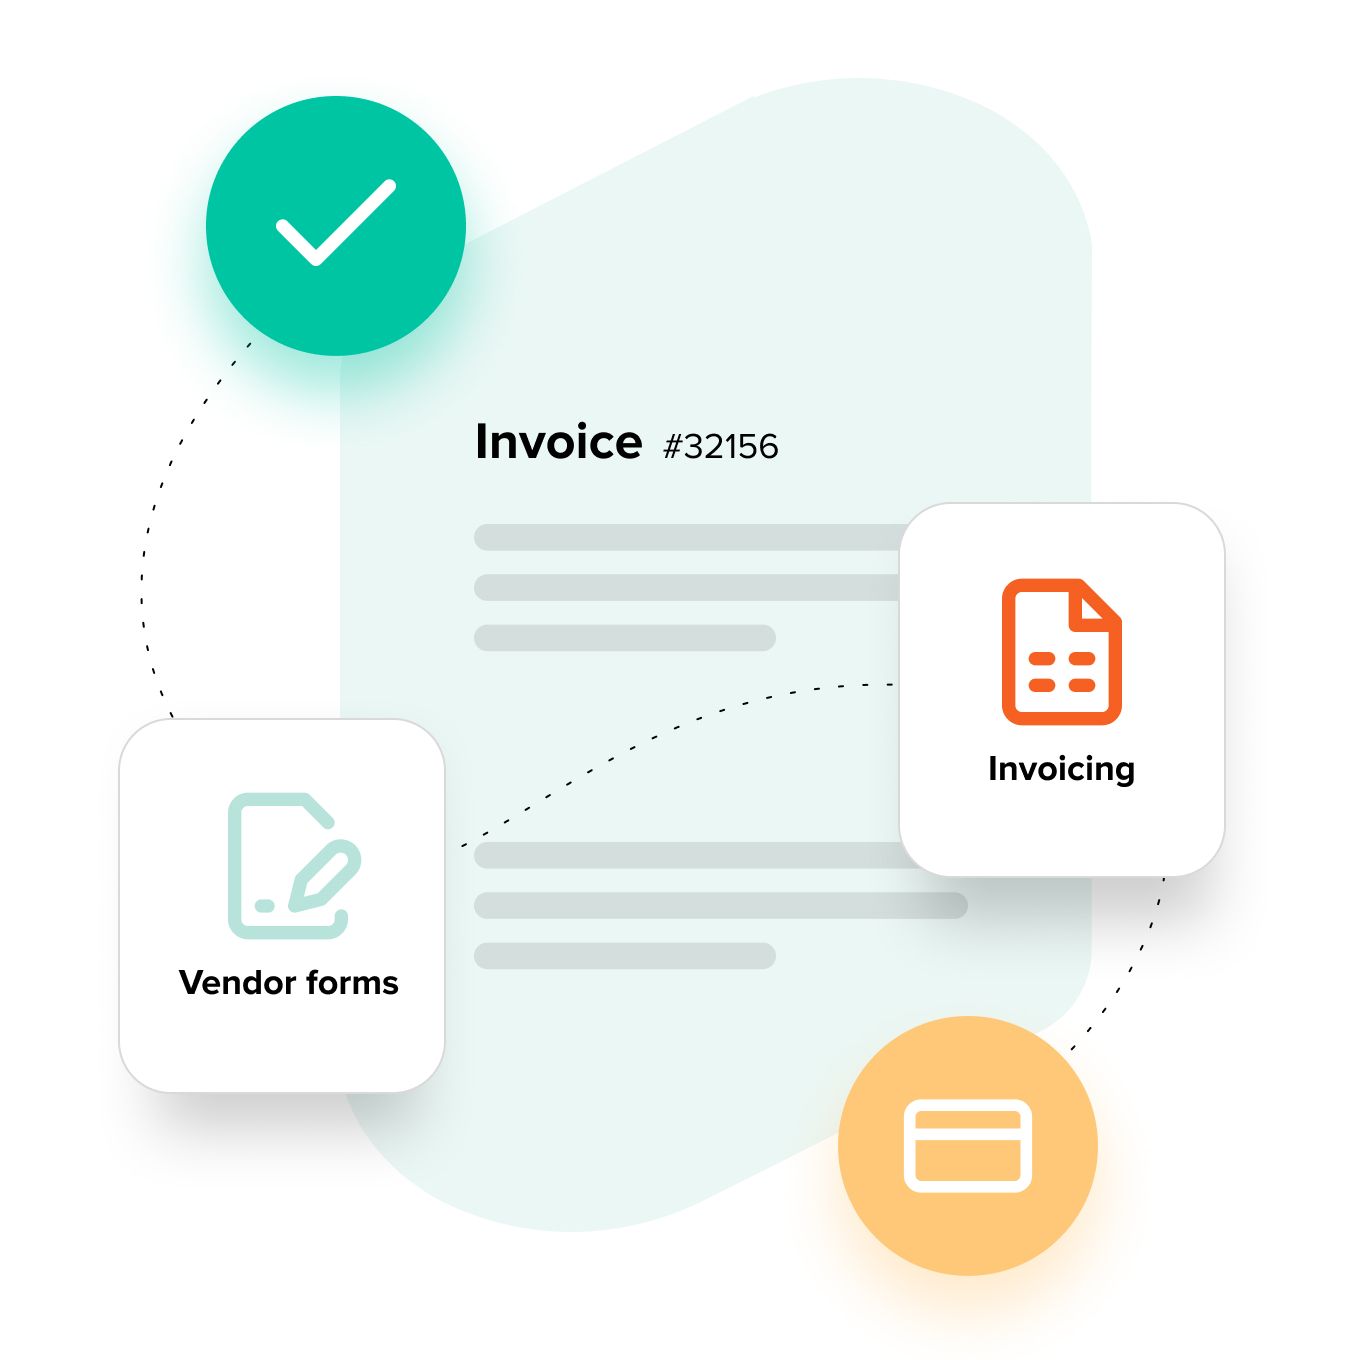 Invoicing and vendor forms